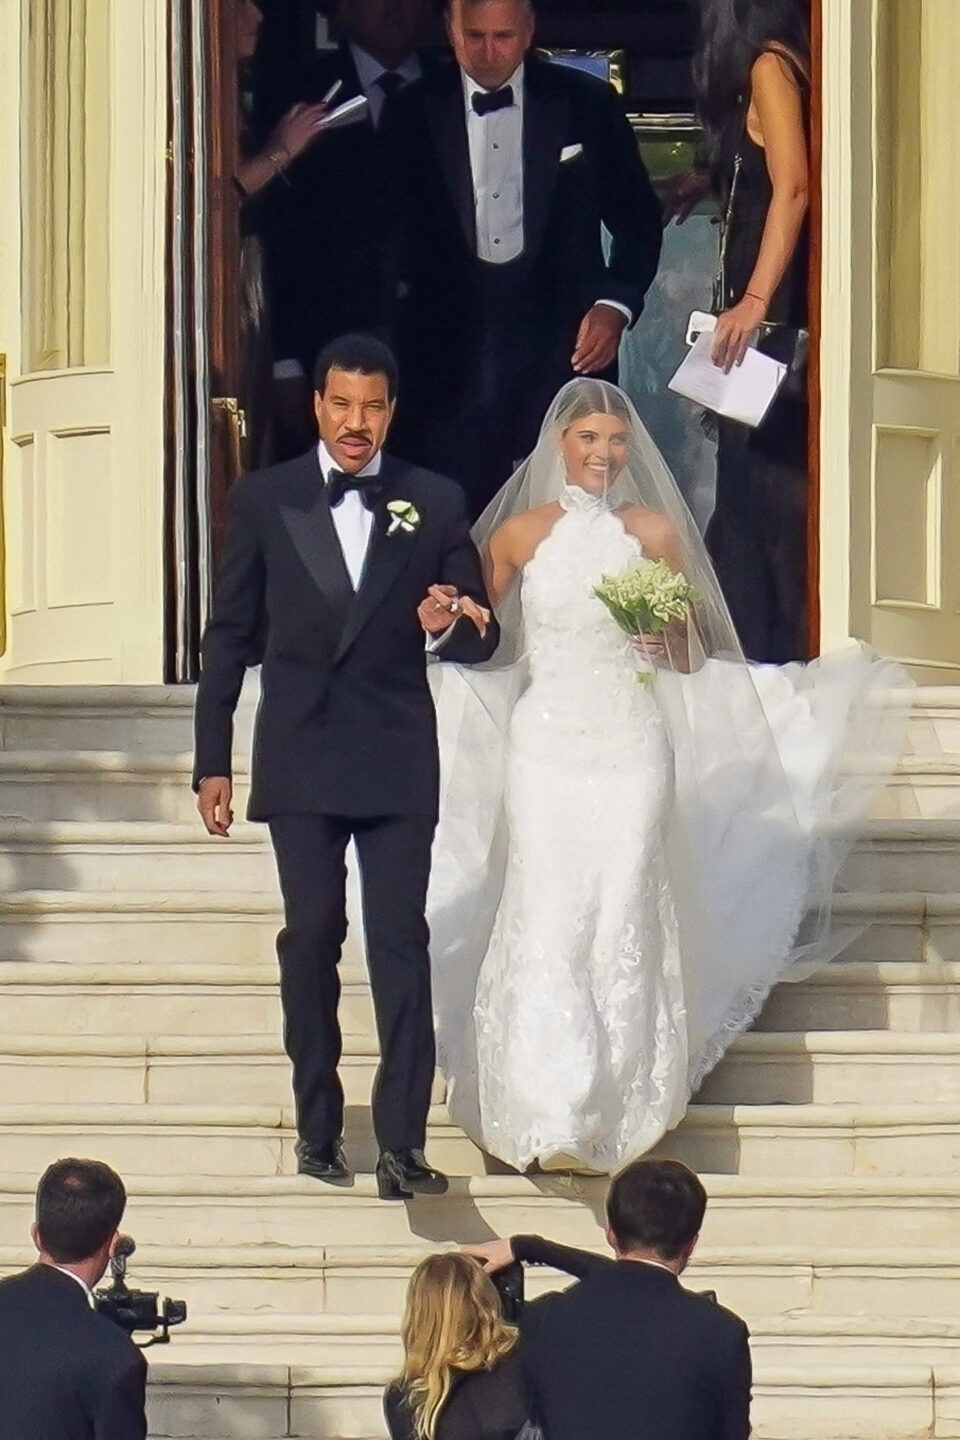 All the celebrity guests at Sofia Richie’s wedding